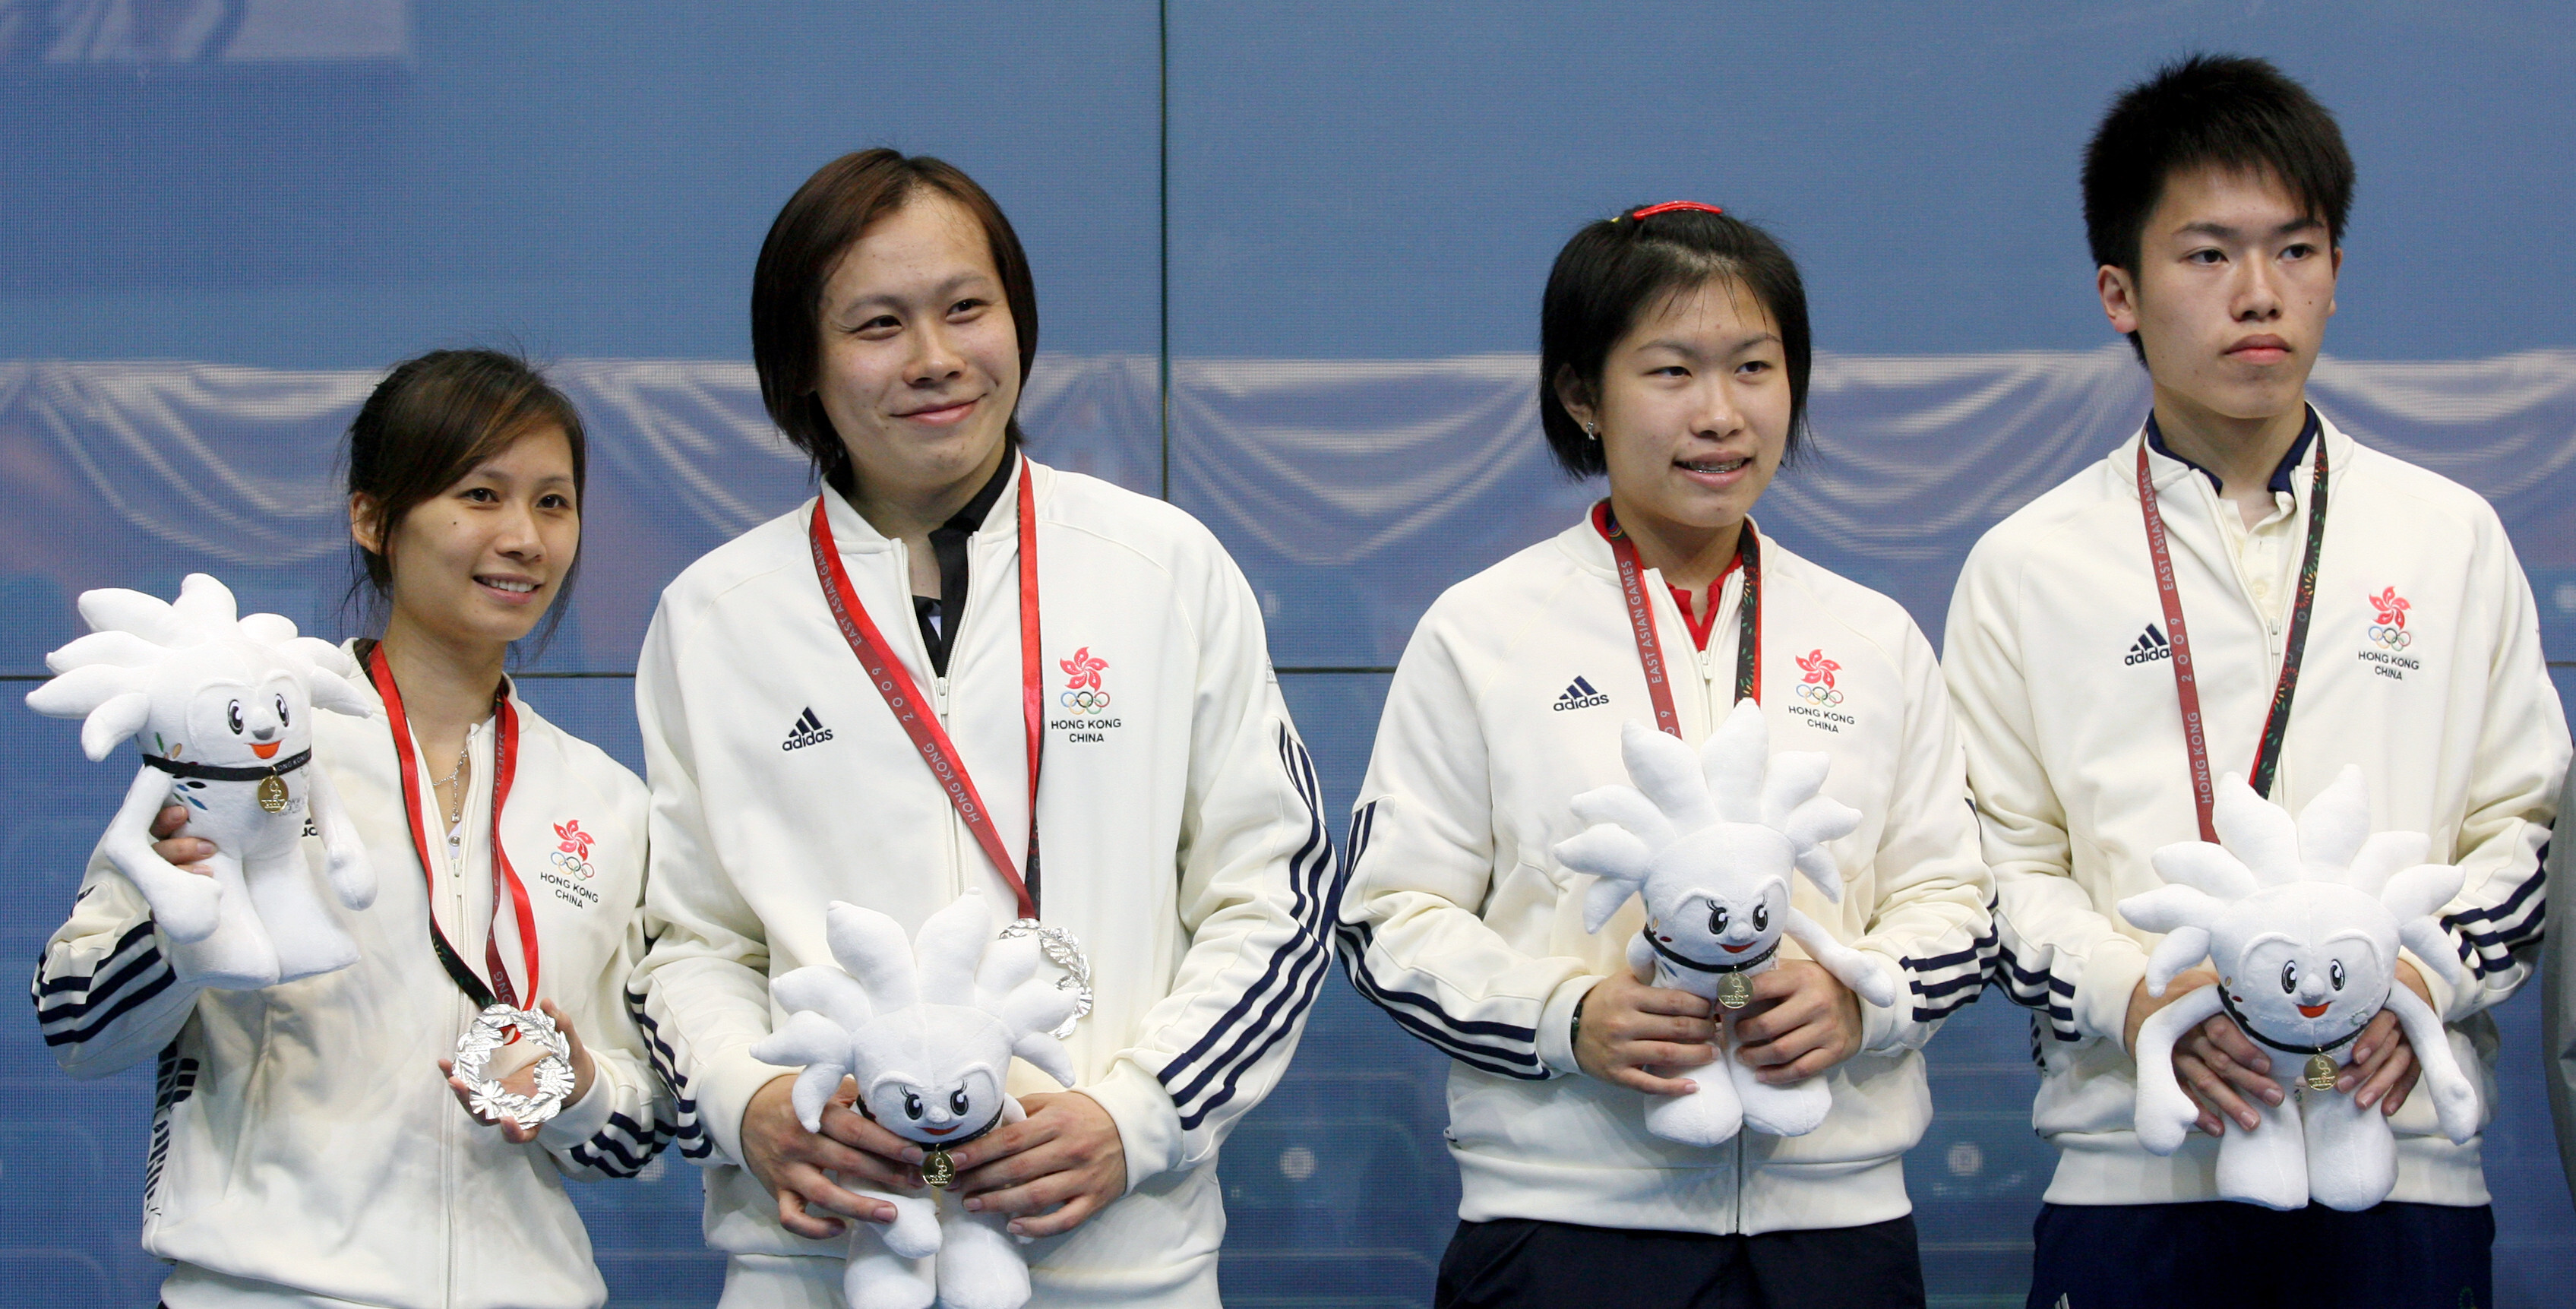 Annie Au Wing-chi (second from right) and younger brother Leo Au Chun-ming captured the mixed doubles gold medal for Hong Kong at 2009 East Asian Games while Rebecca Chiu Wing-yin (left) and Roger Ngan Lun-cheung are second for silver. SCMP pictures.